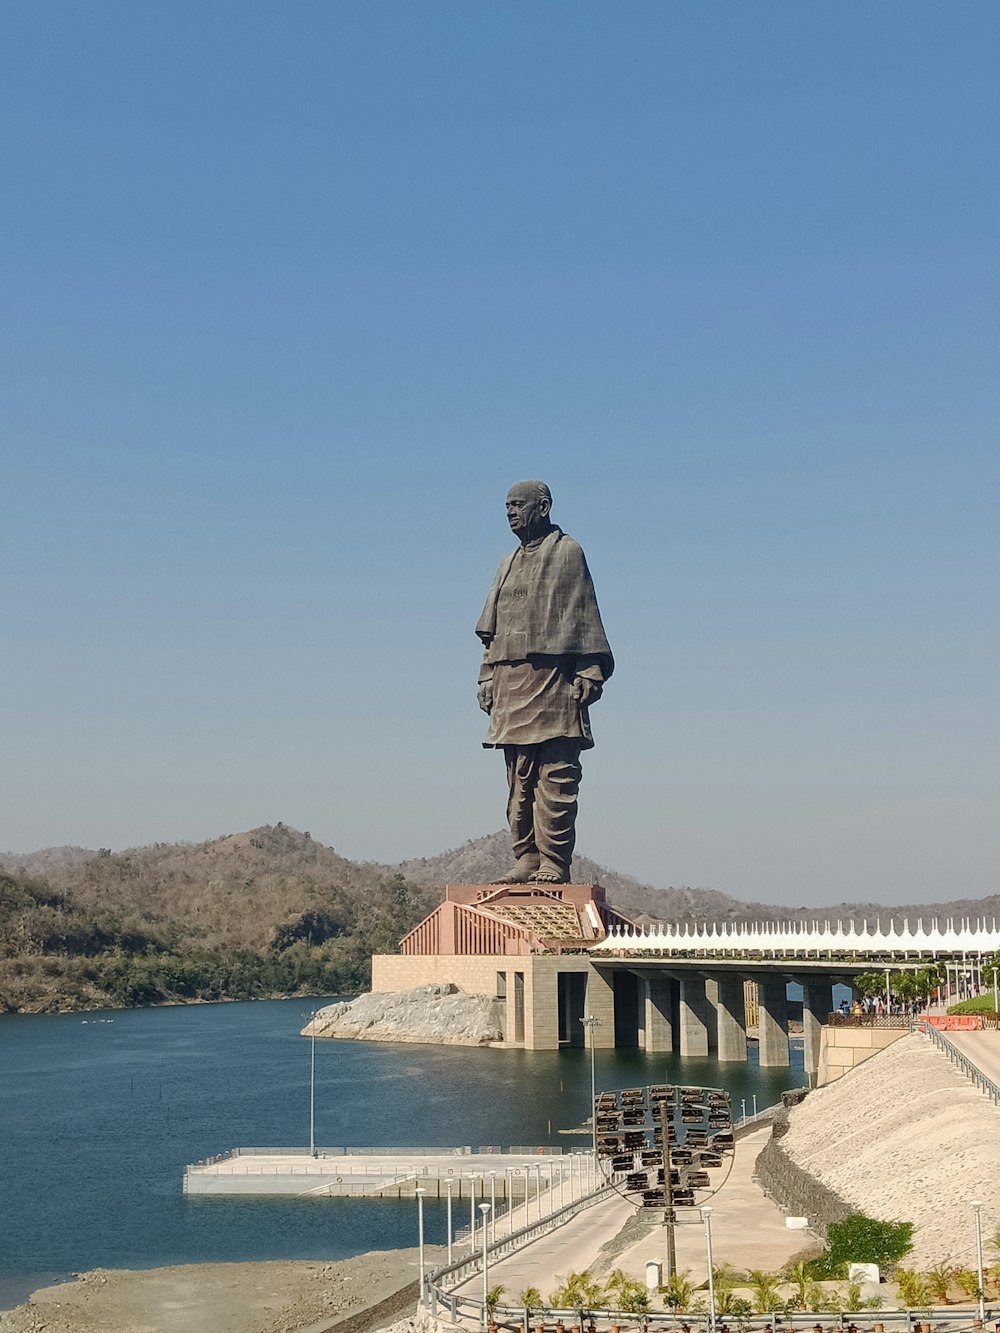 a large statue of a man standing on top of a bridge